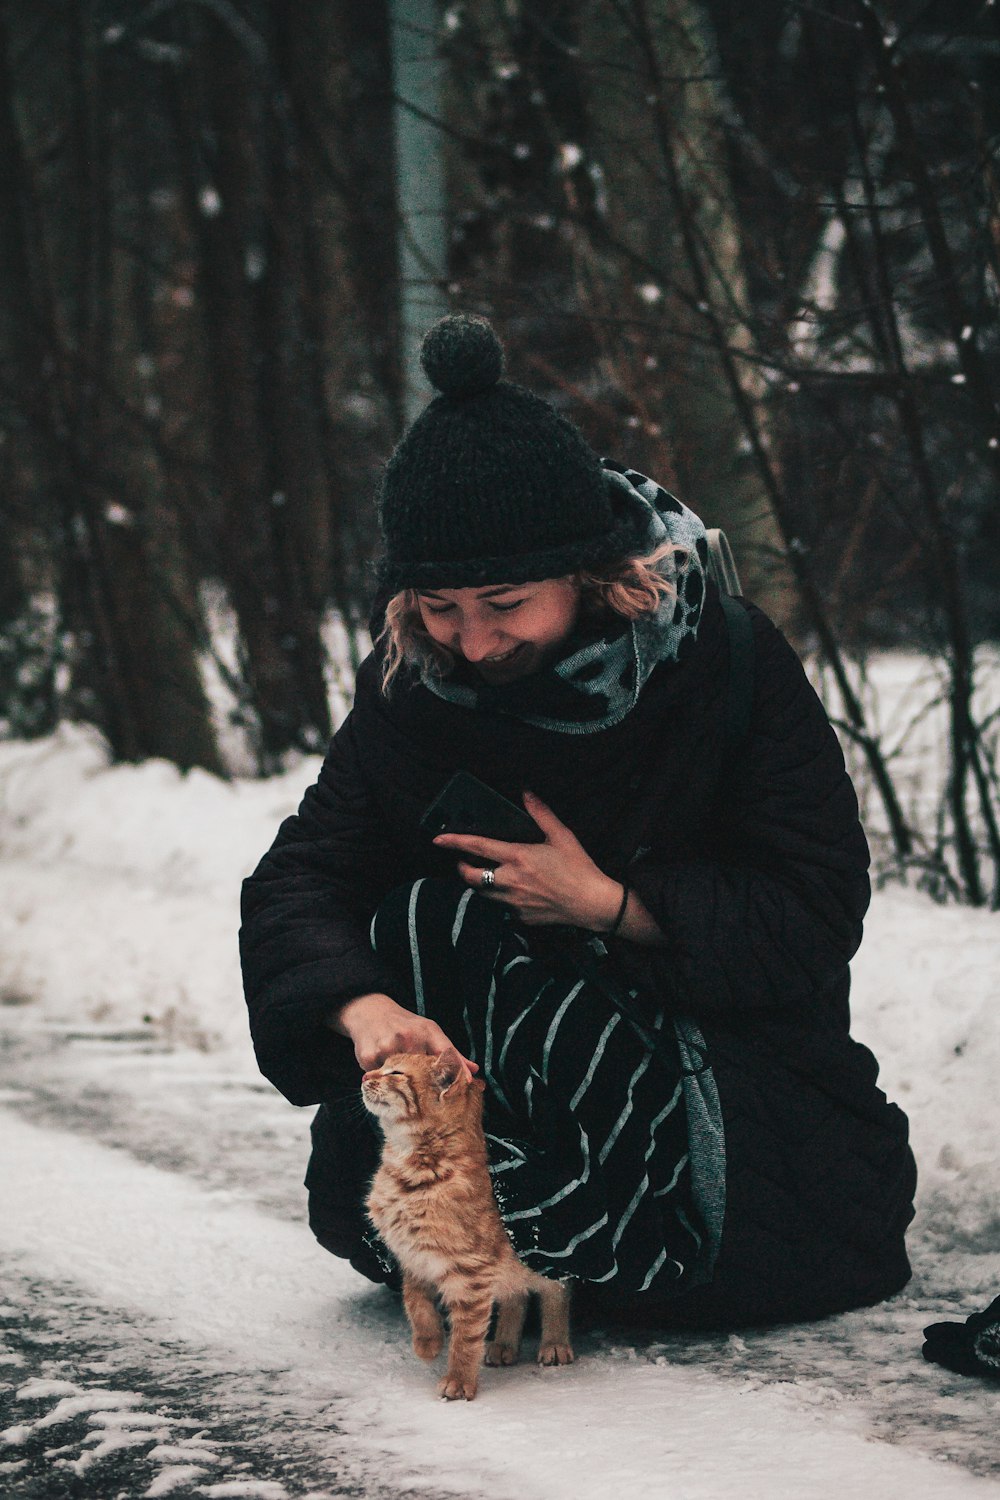 a woman kneeling down next to a cat in the snow